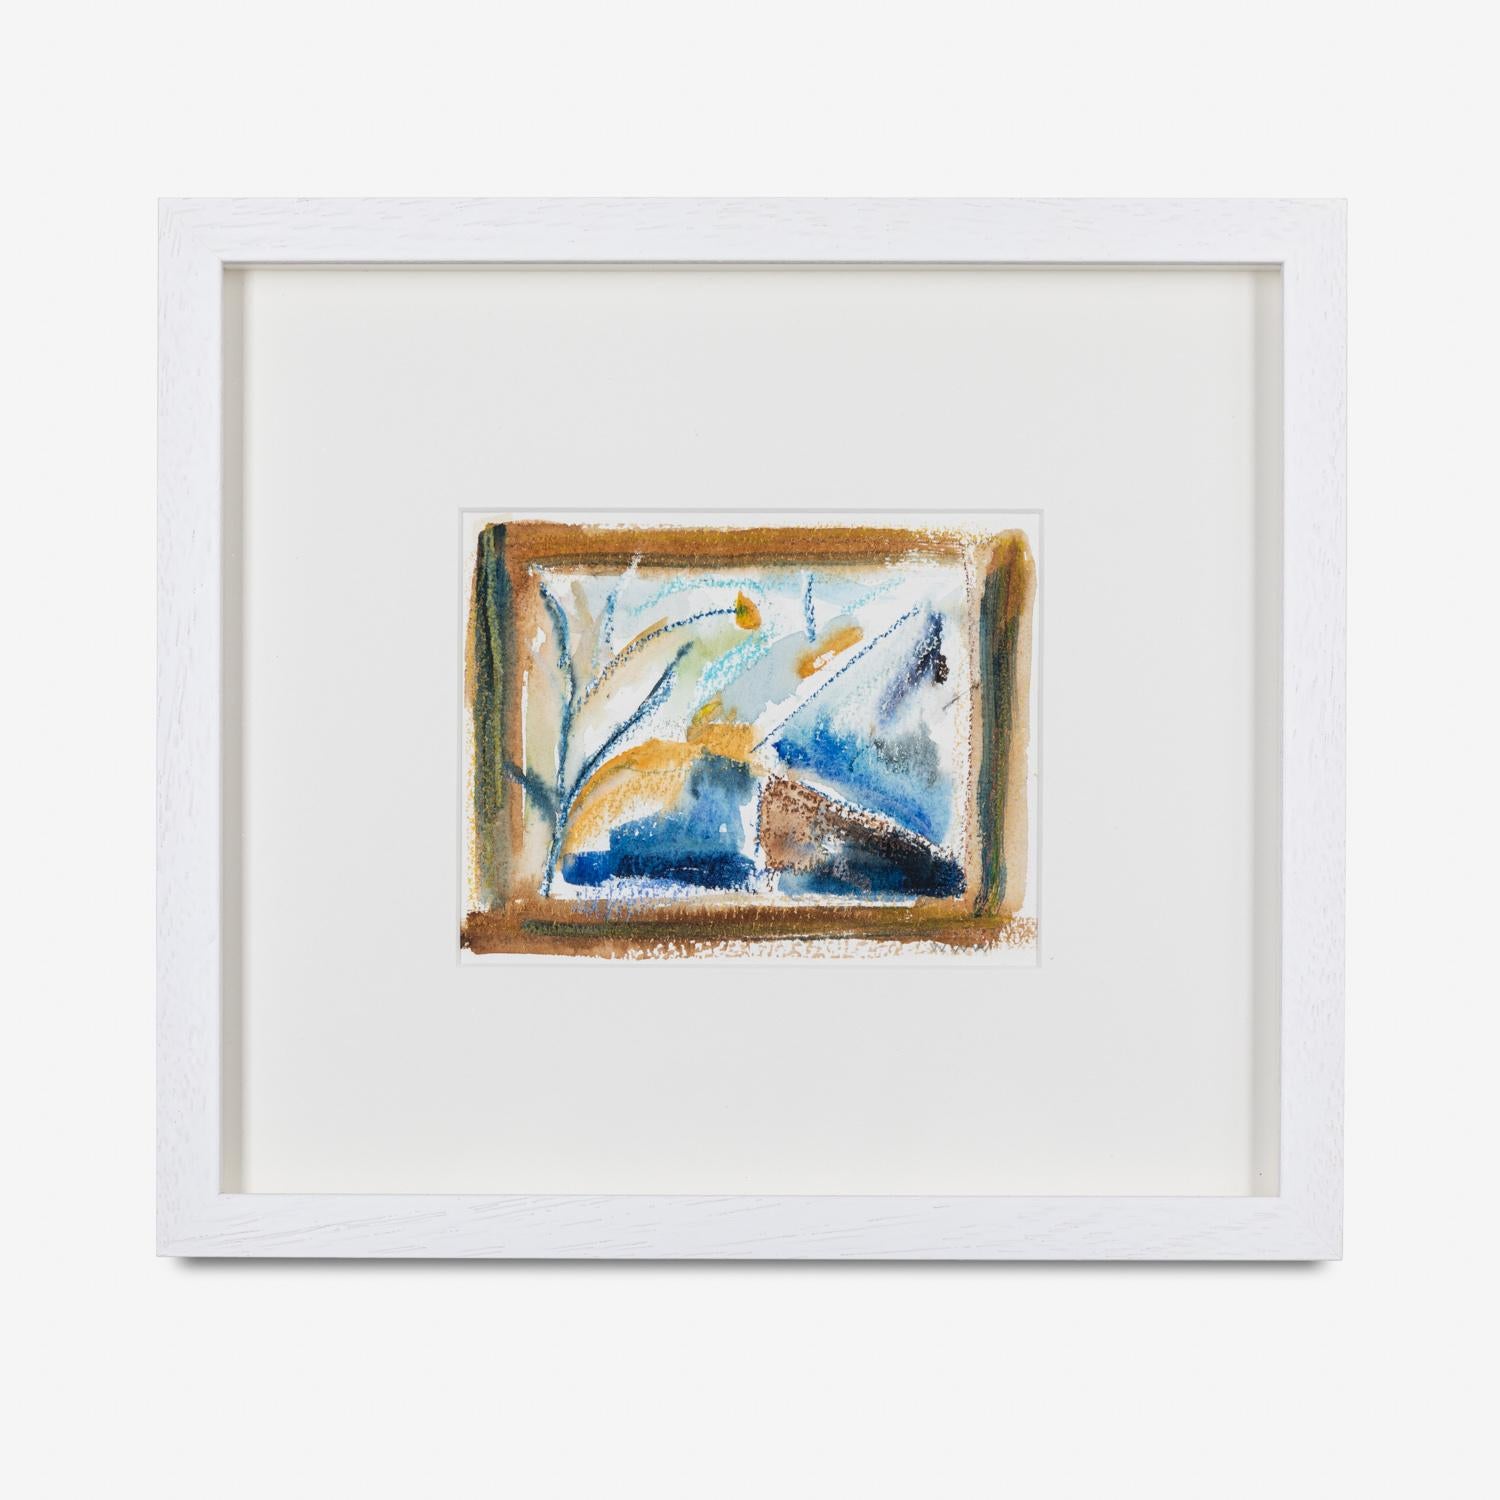 Mixed media by Yorkshire artist William Watson-West. 

Painting measurements - Height 14cm x Width 18cm. Frame measurements – Height 32cm x Width 36cm x Depth 3.5cm.


William Watson-West is a painter whose first-hand observations of landscape,